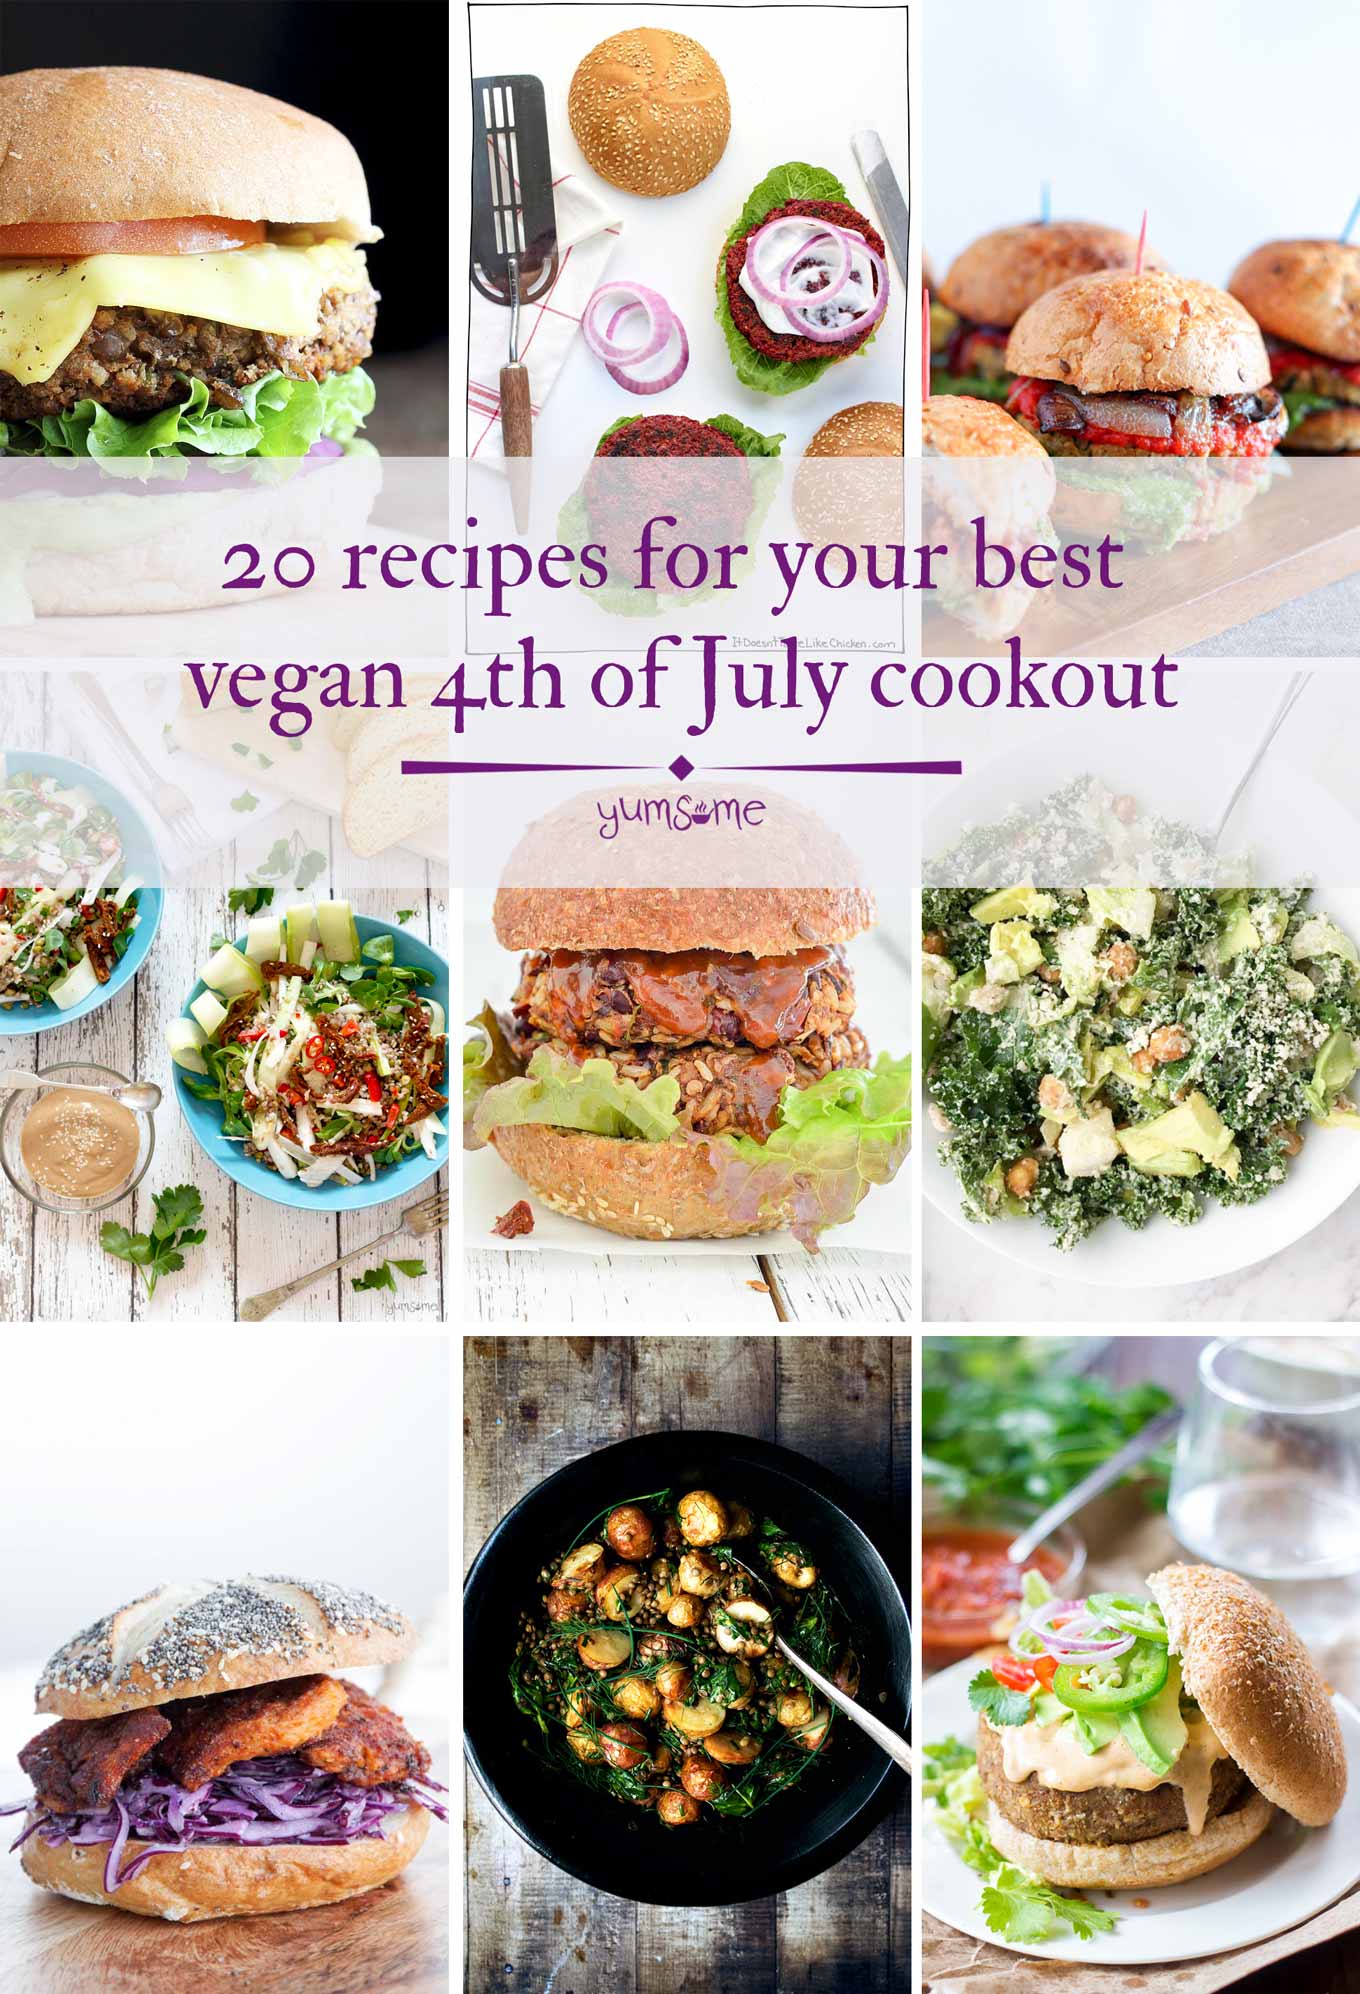 hero image: 20 recipes for your best vegan 4th of July Cookout | yumsome.com